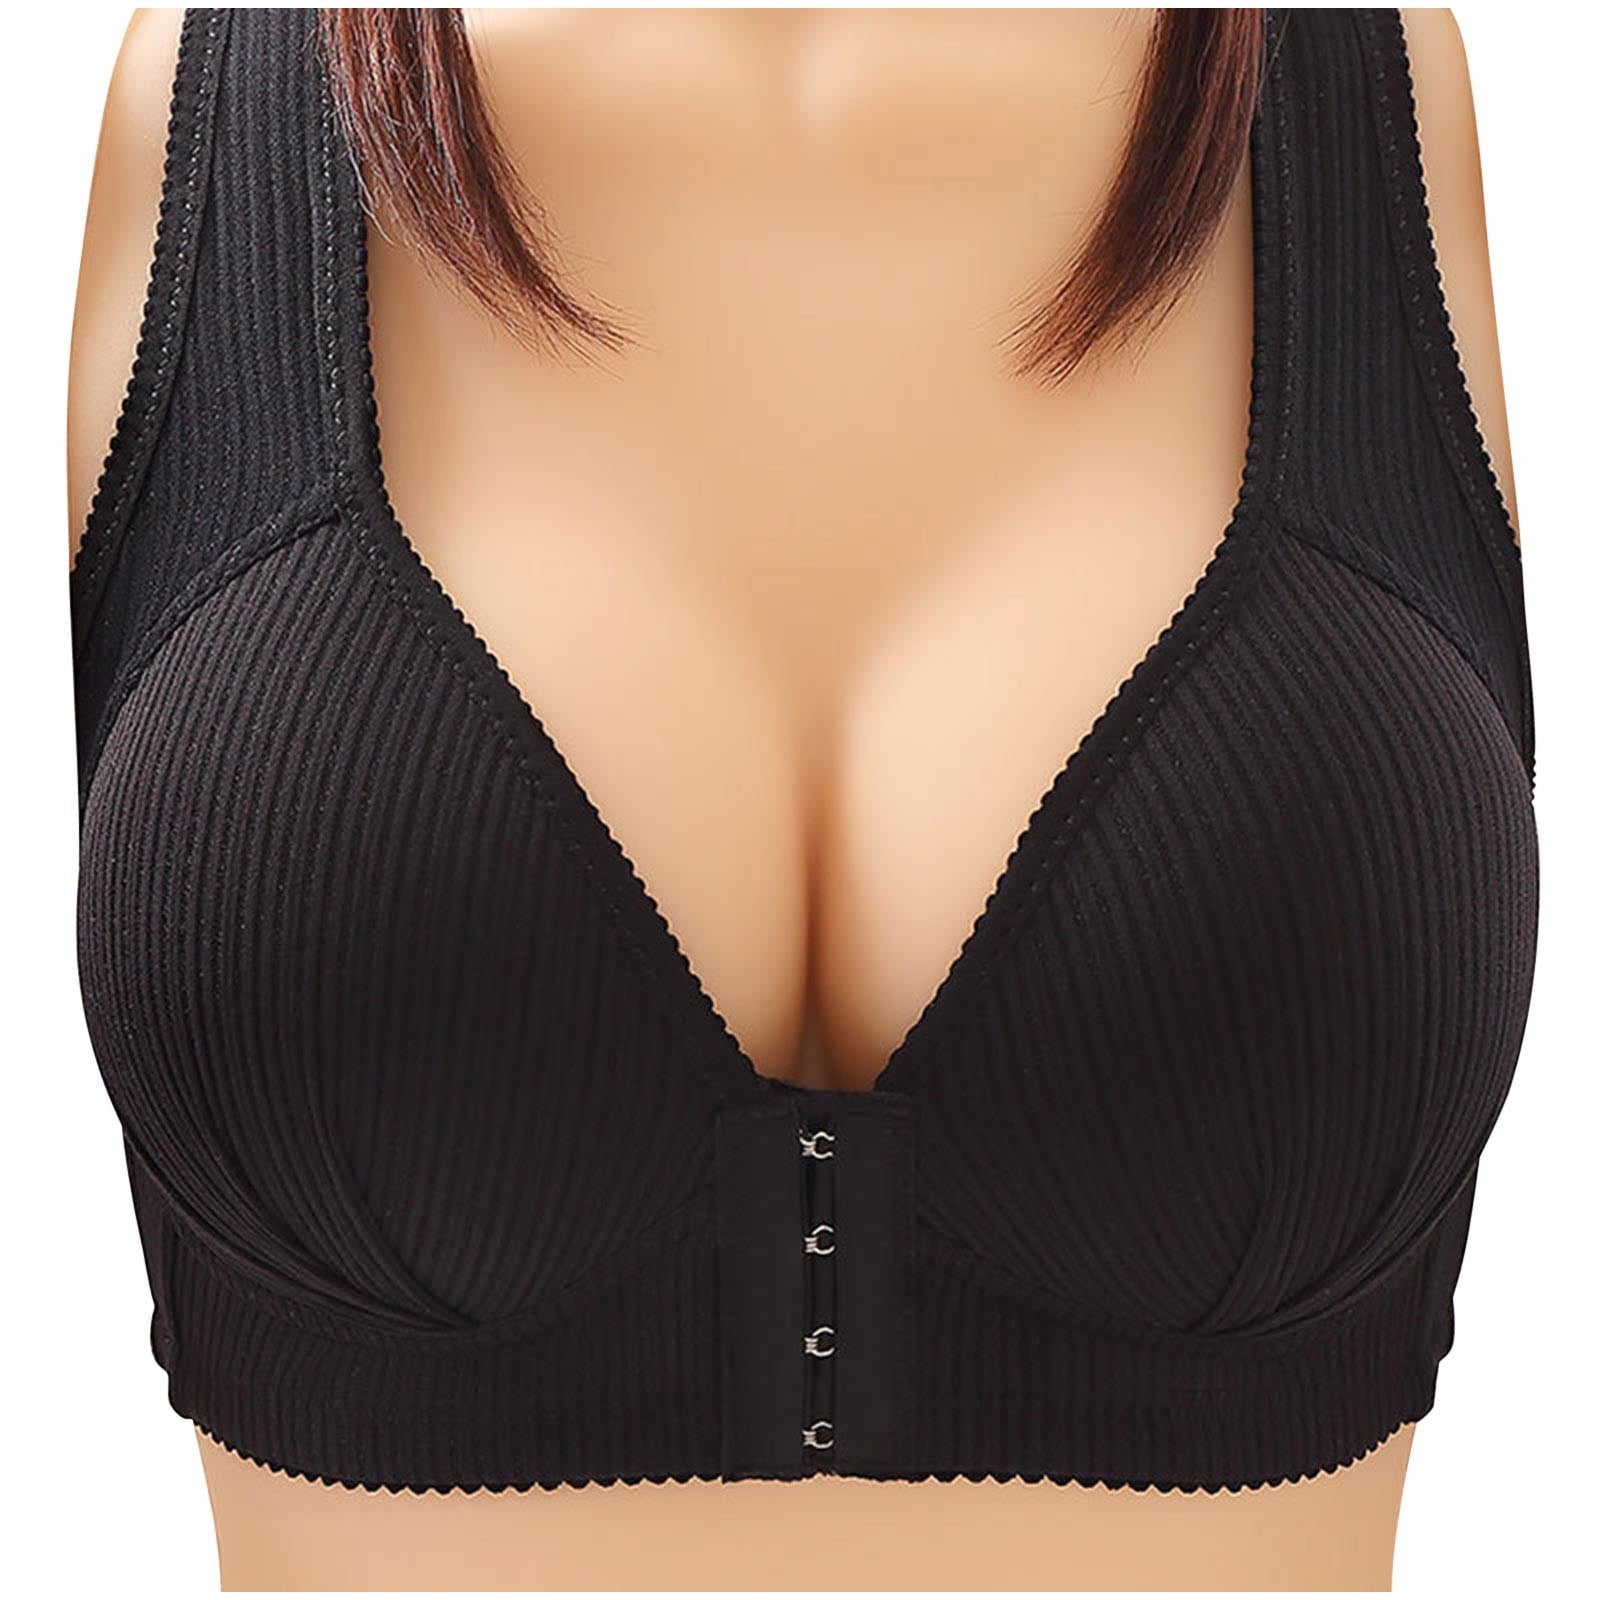 YWDJ Bras for Women Push Up No Underwire Plus Size Front Closure